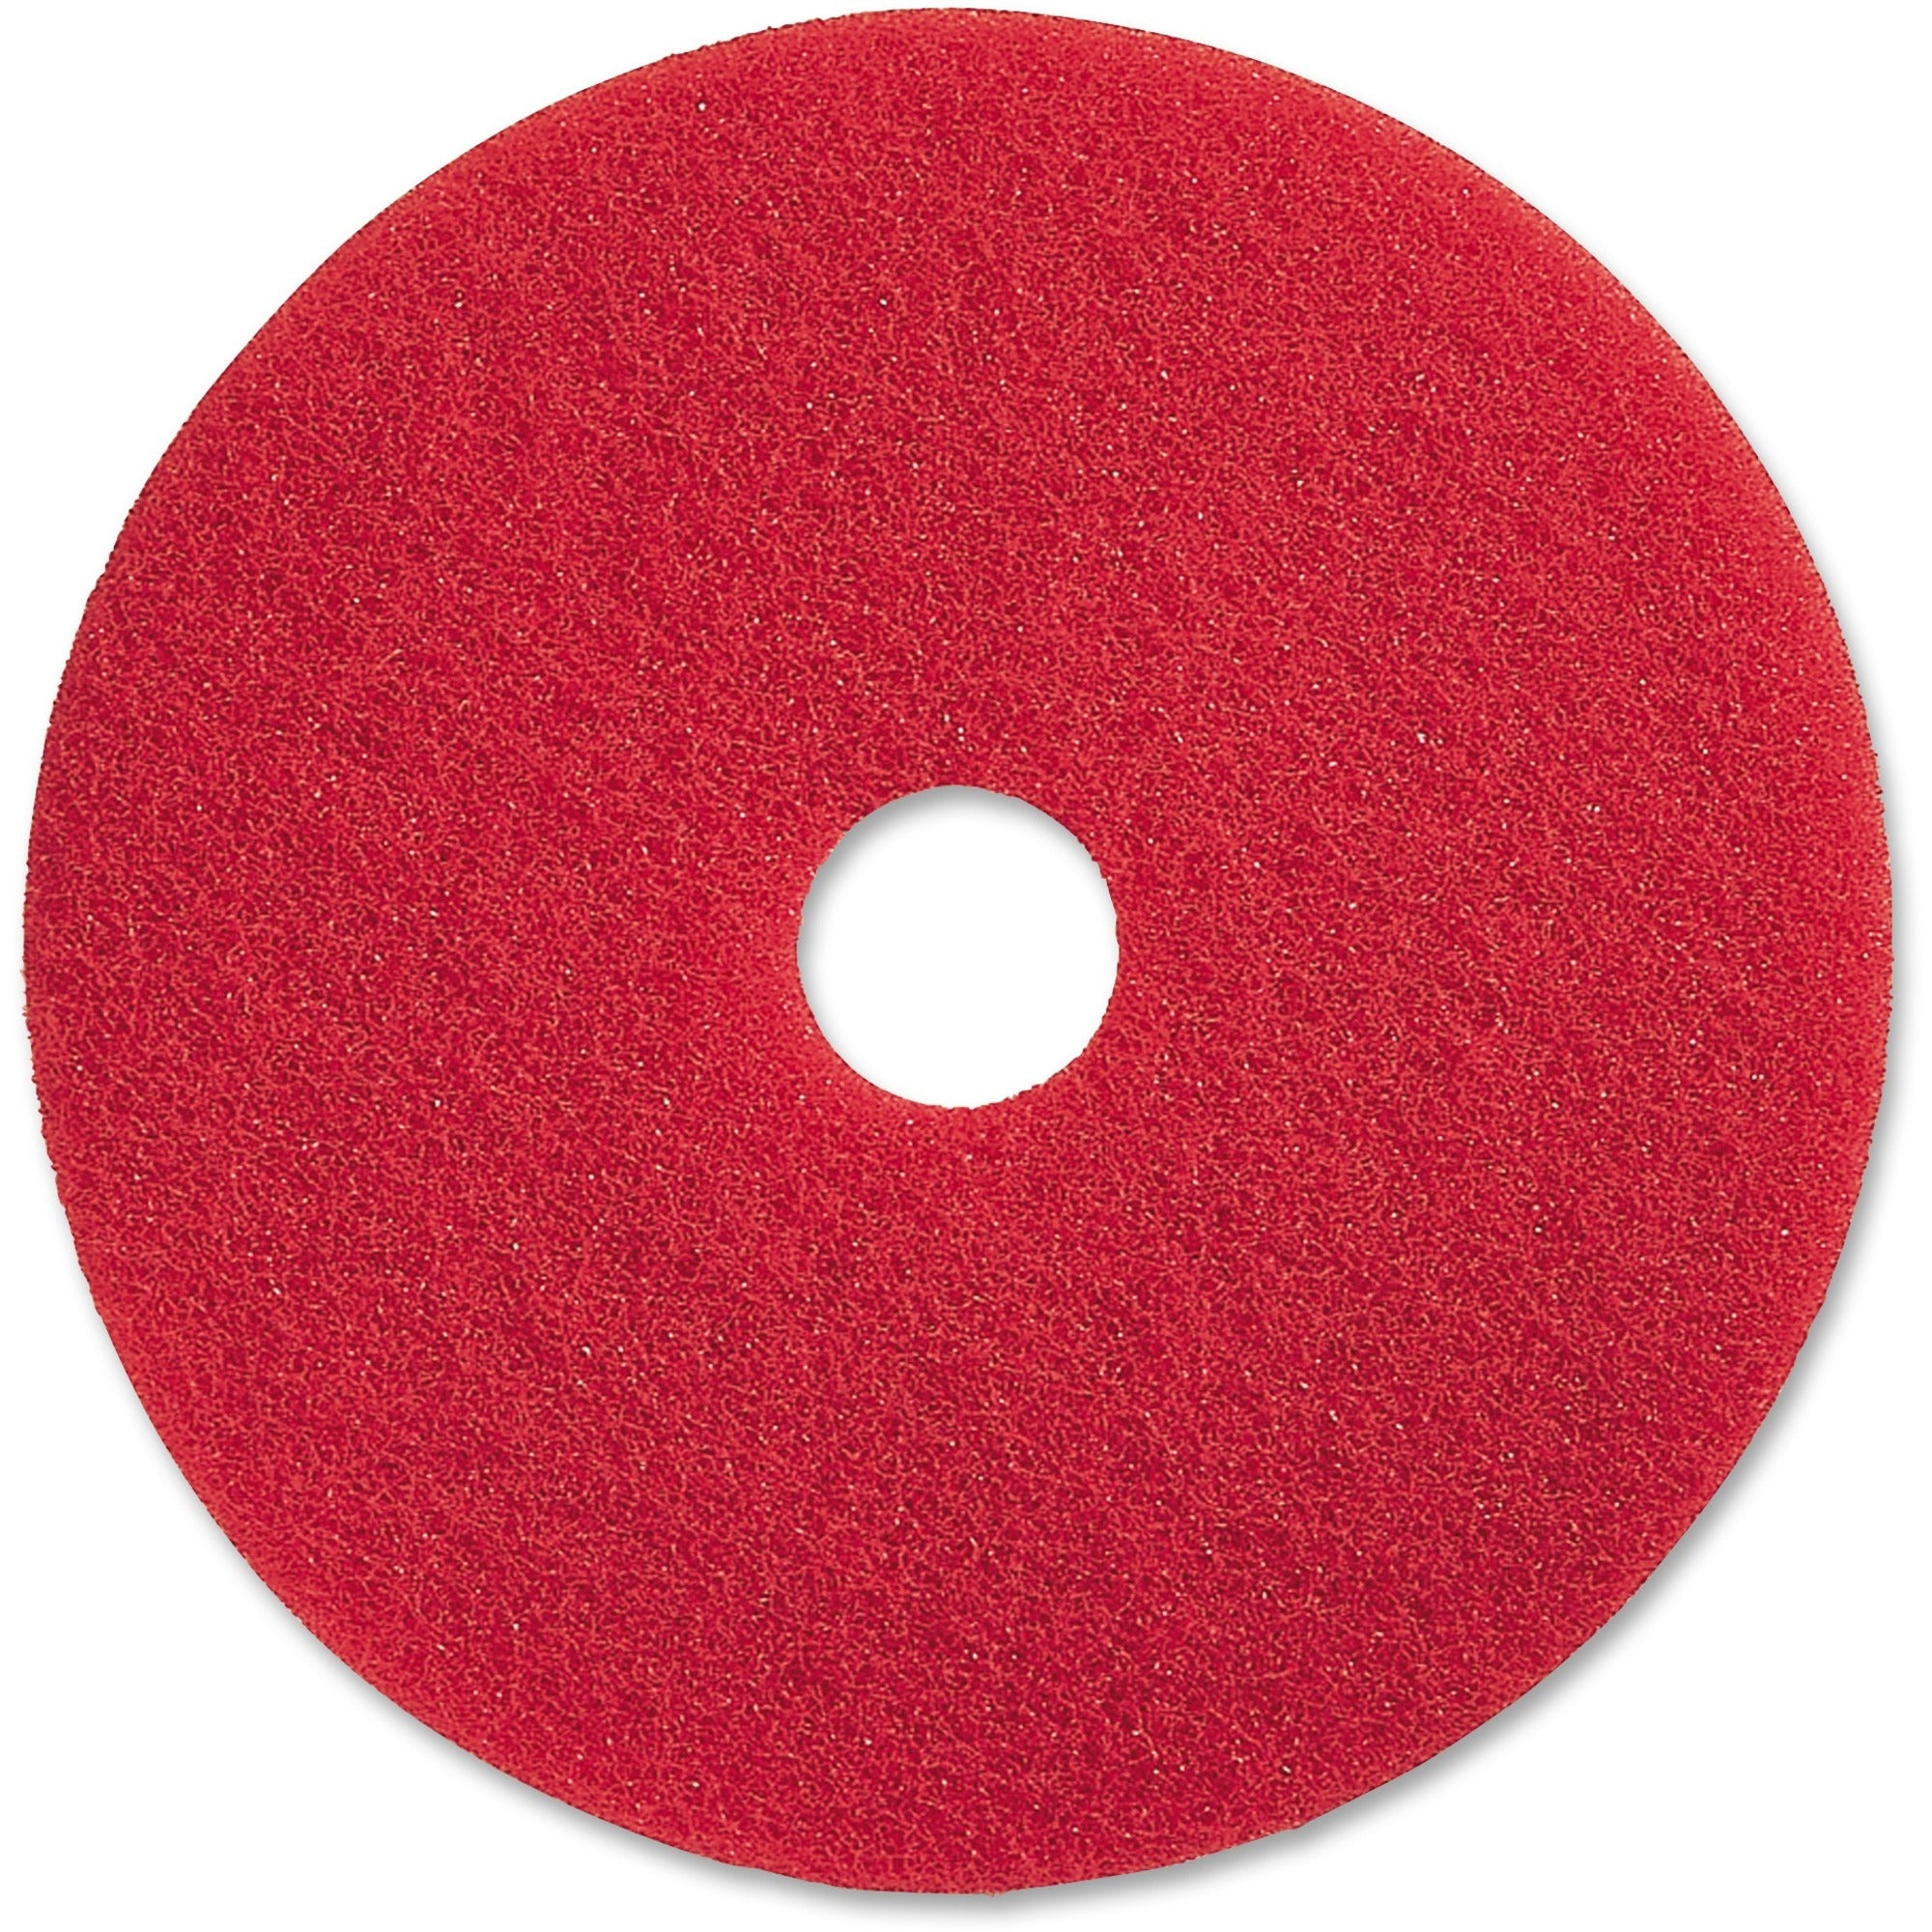 Genuine Joe Red Buffing Floor Pad - 20" Diameter - 5/Carton x 20" Diameter x 1" Thickness - Buffing, Scrubbing, Floor - 175 rpm to 350 rpm Speed Supported - Flexible, Resilient, Rotate, Dirt Remover - Fiber - Red - 